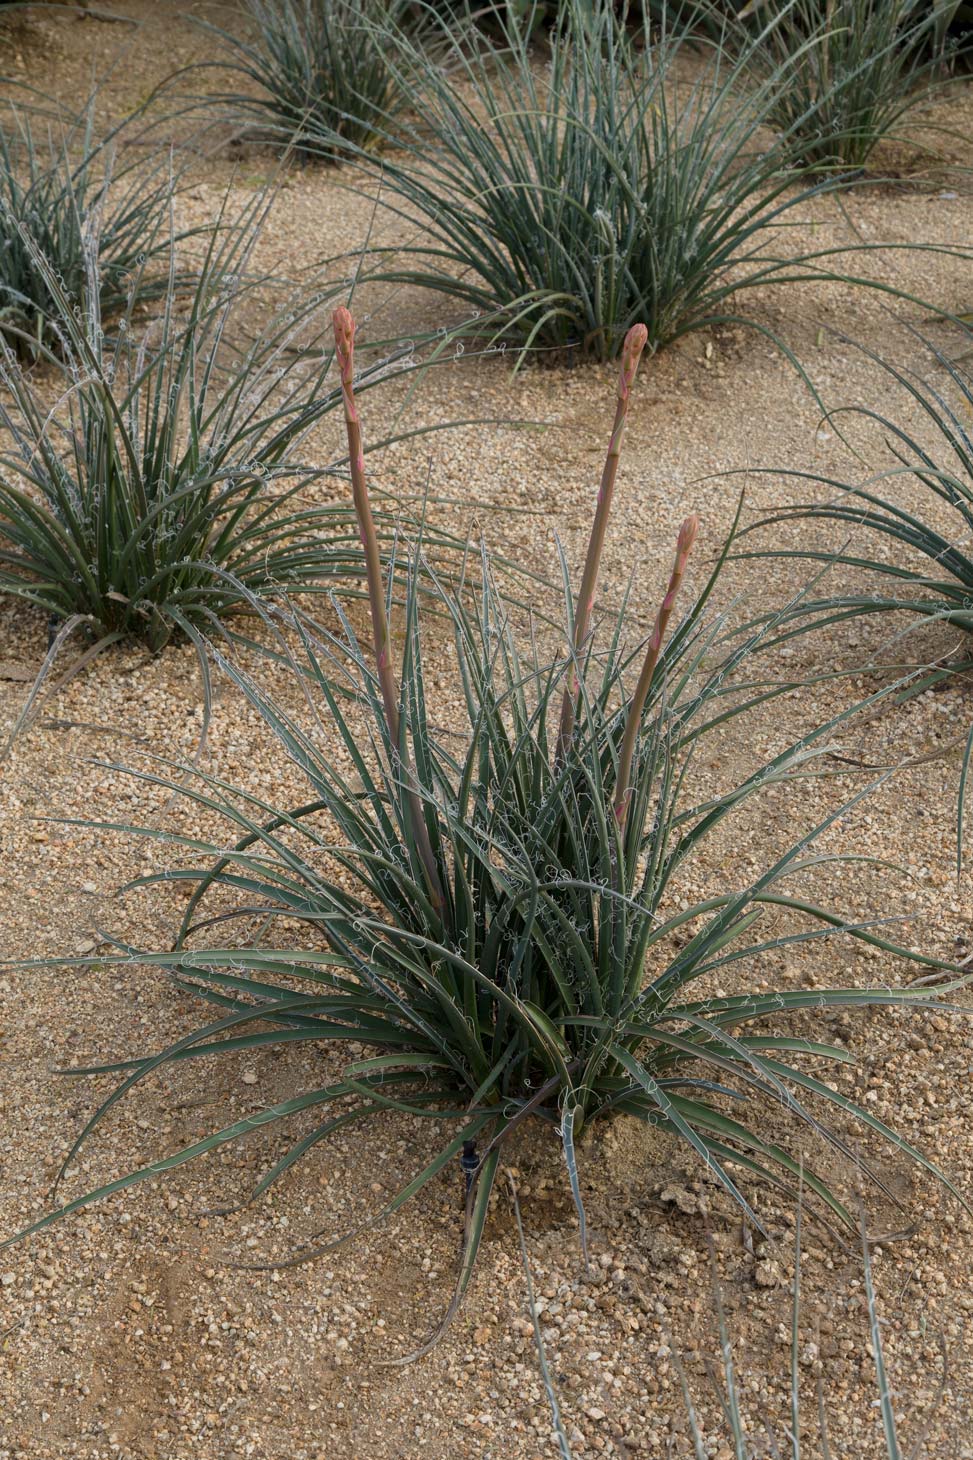 A wide view of the Brakelights Hesperaloe. The plant is about knee-high with dark green leaves and two flowering stalks emerging from its center.